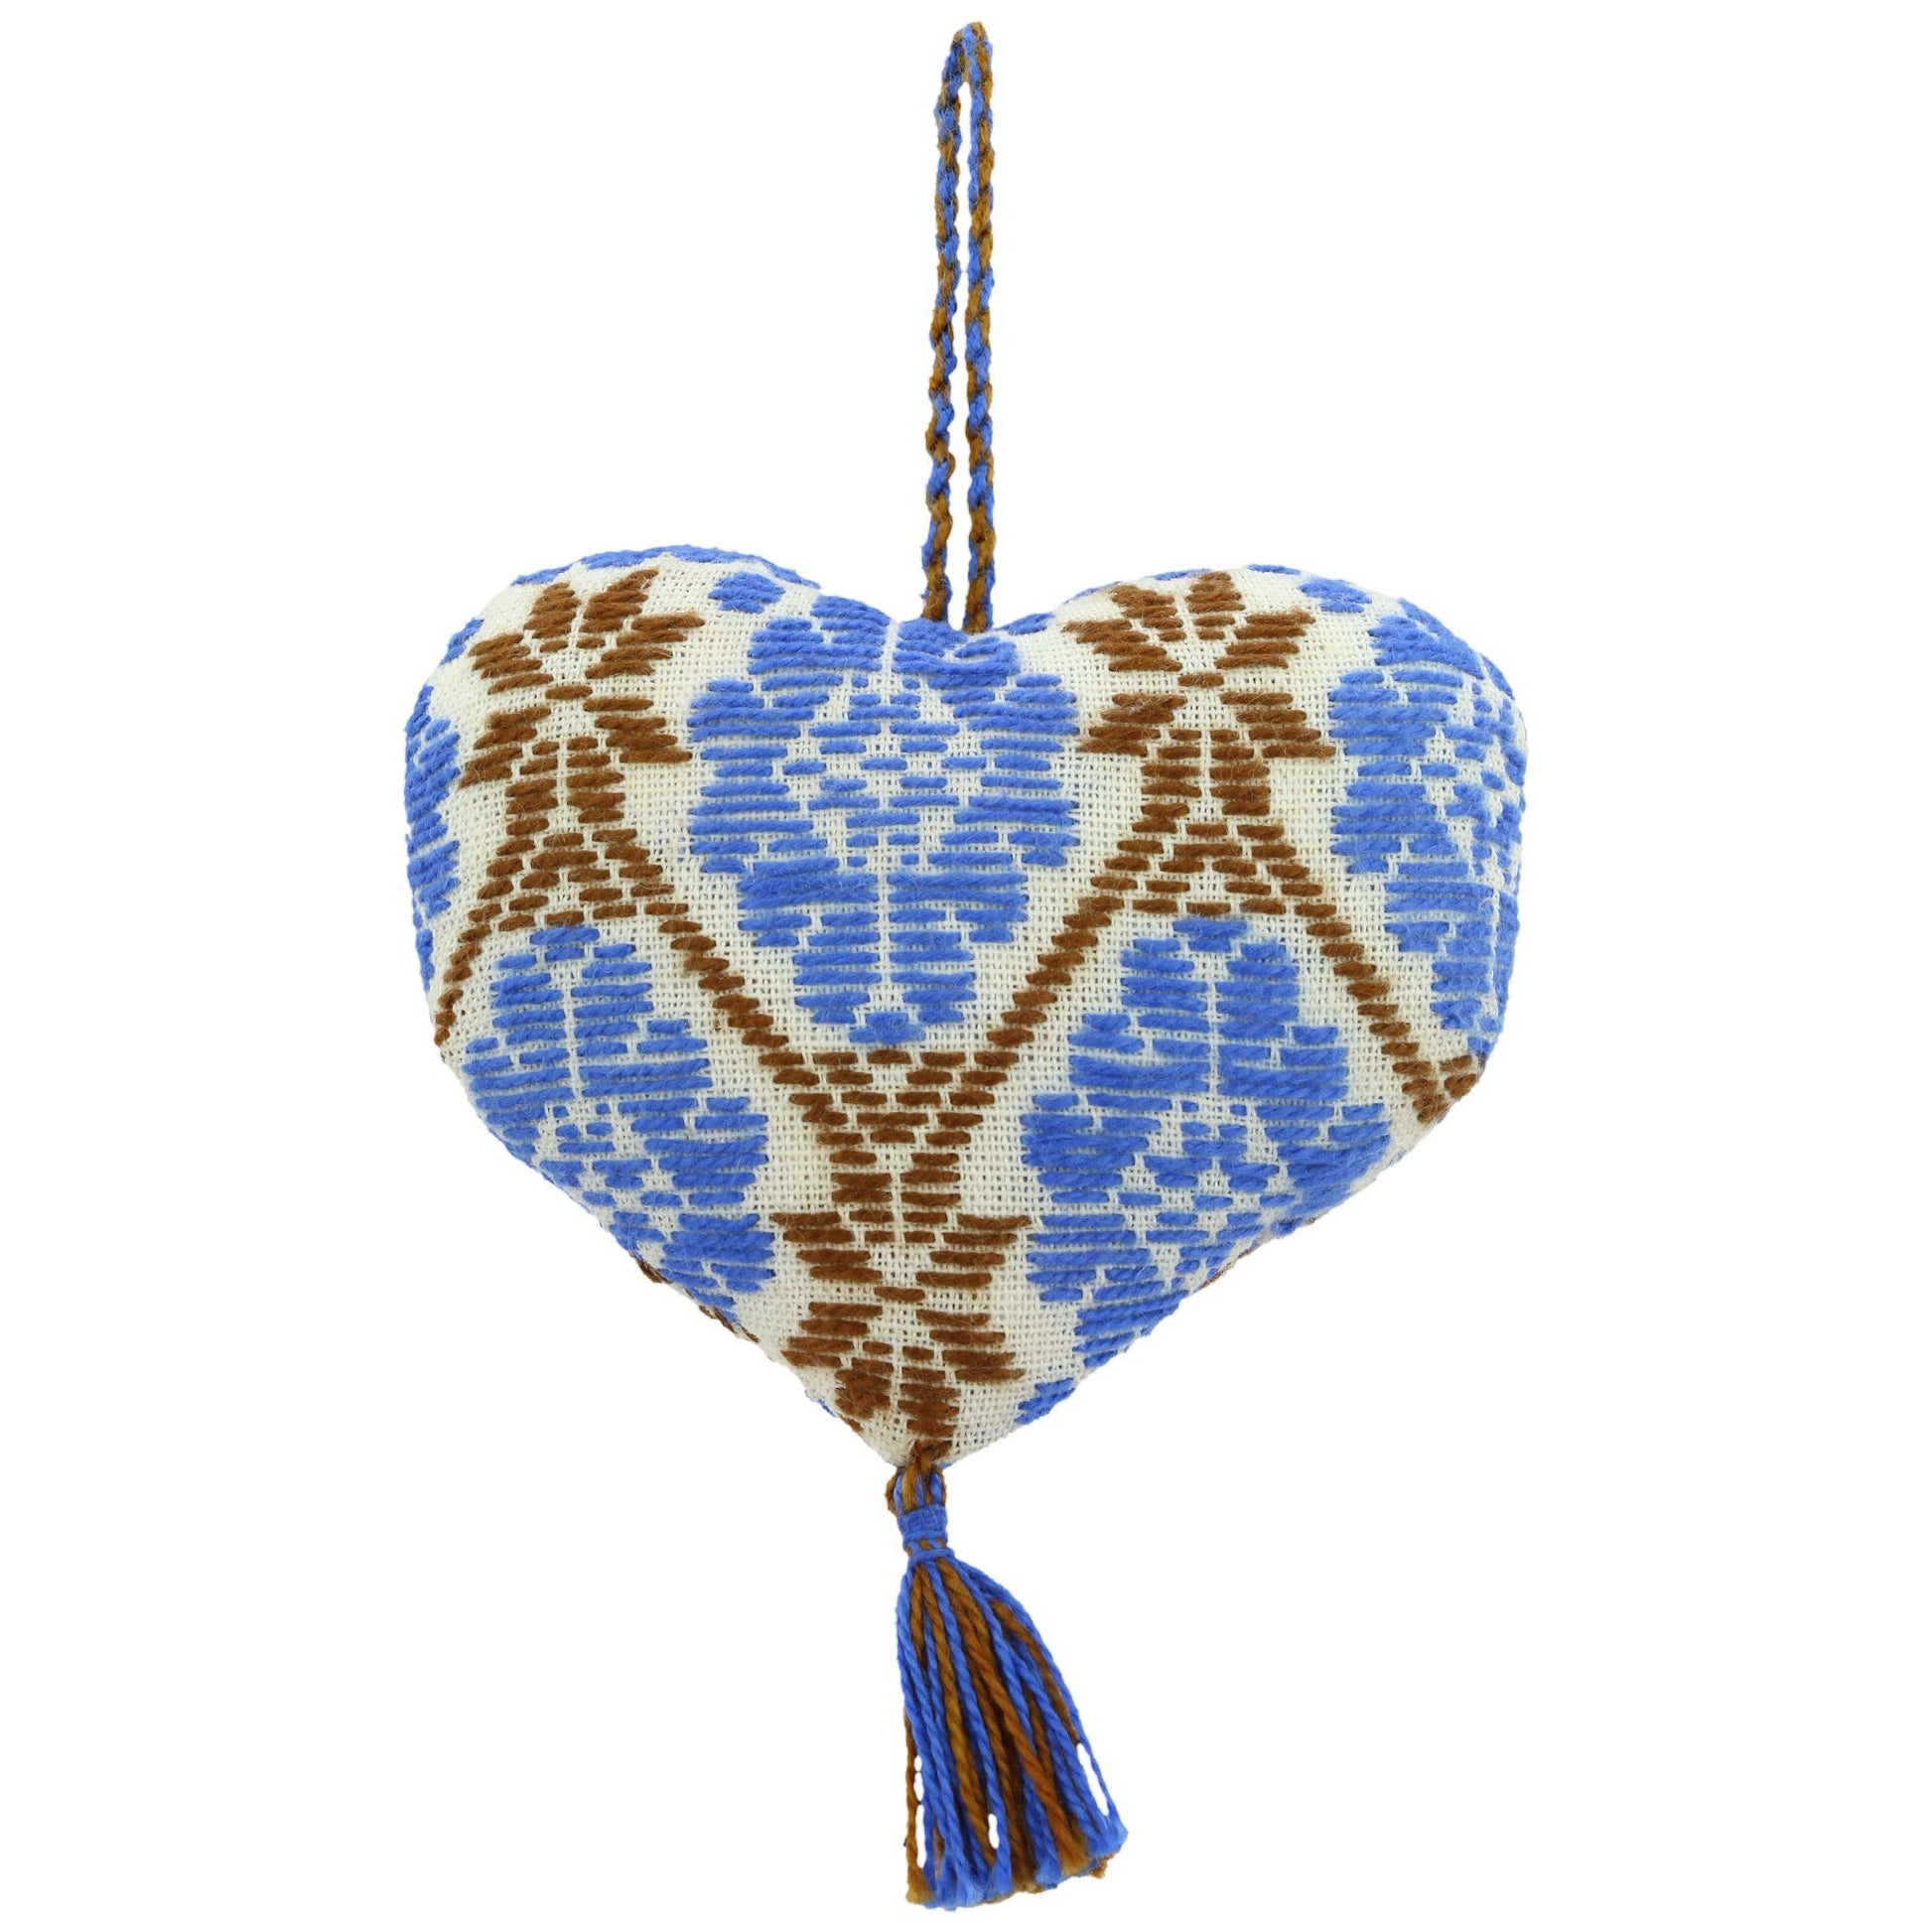 Hand-Embroidered Heart Ornament